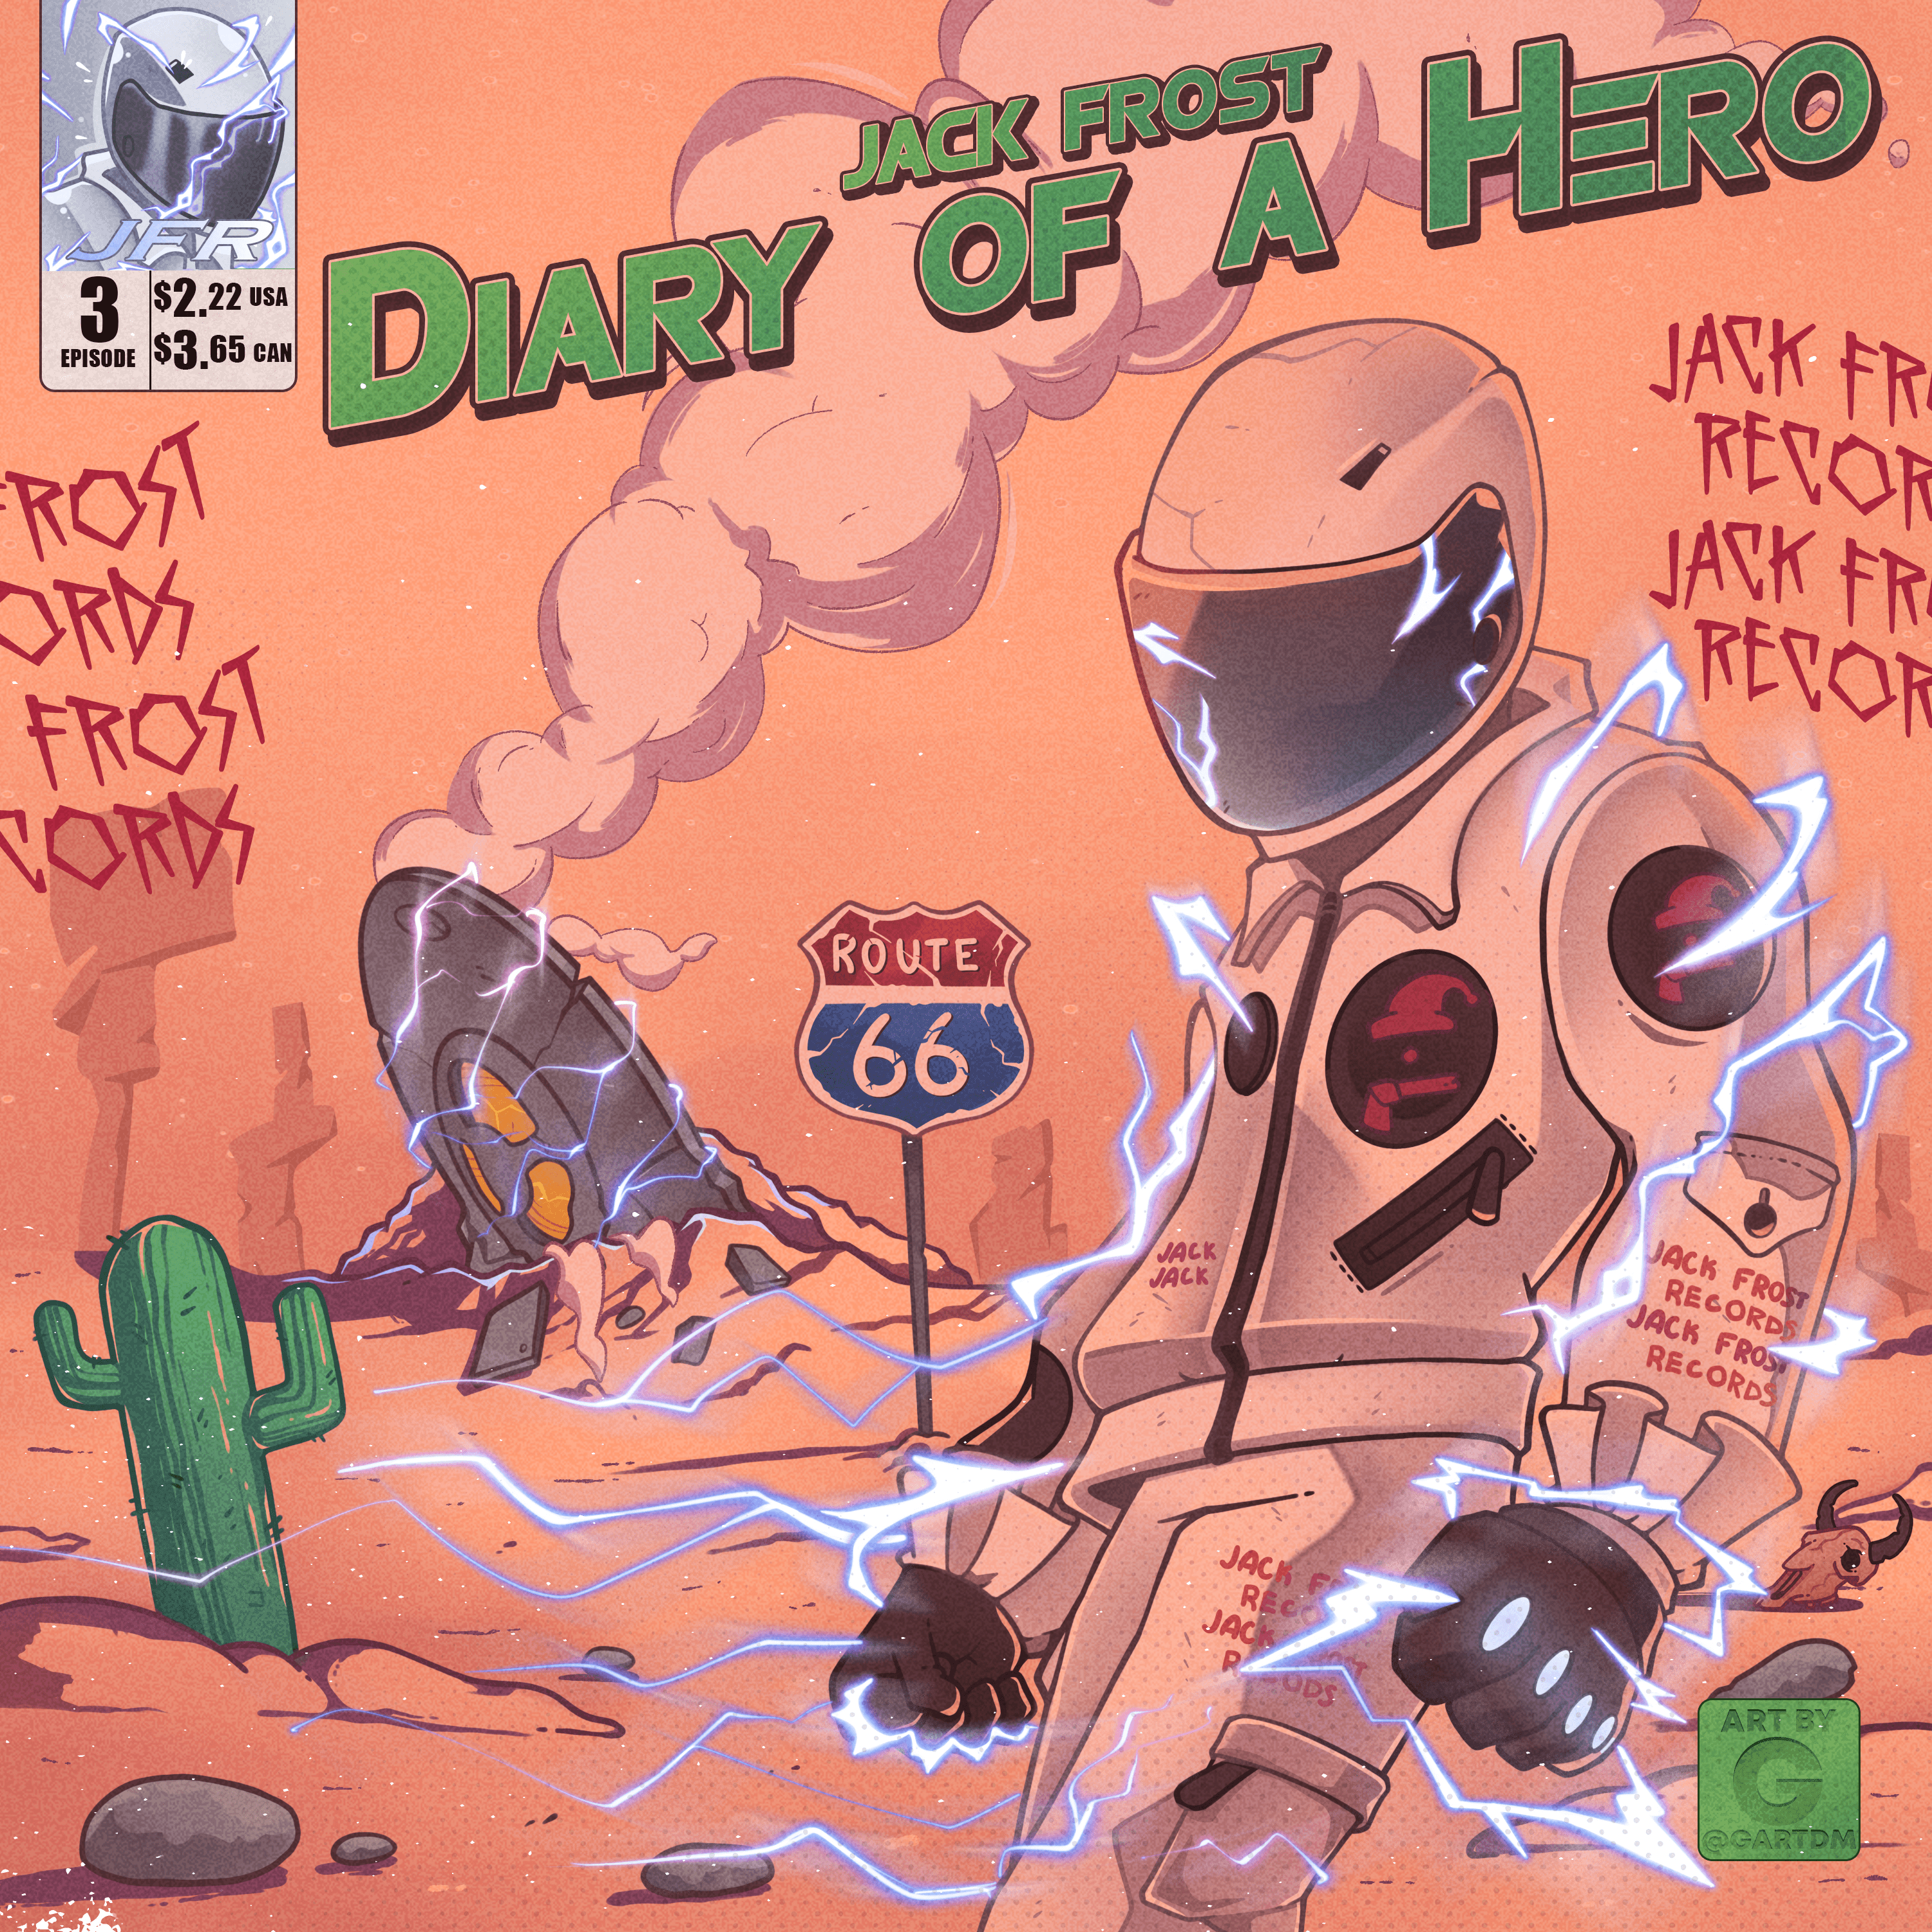 Diary of a Hero by Jack Frost (Episode 3) 144/300